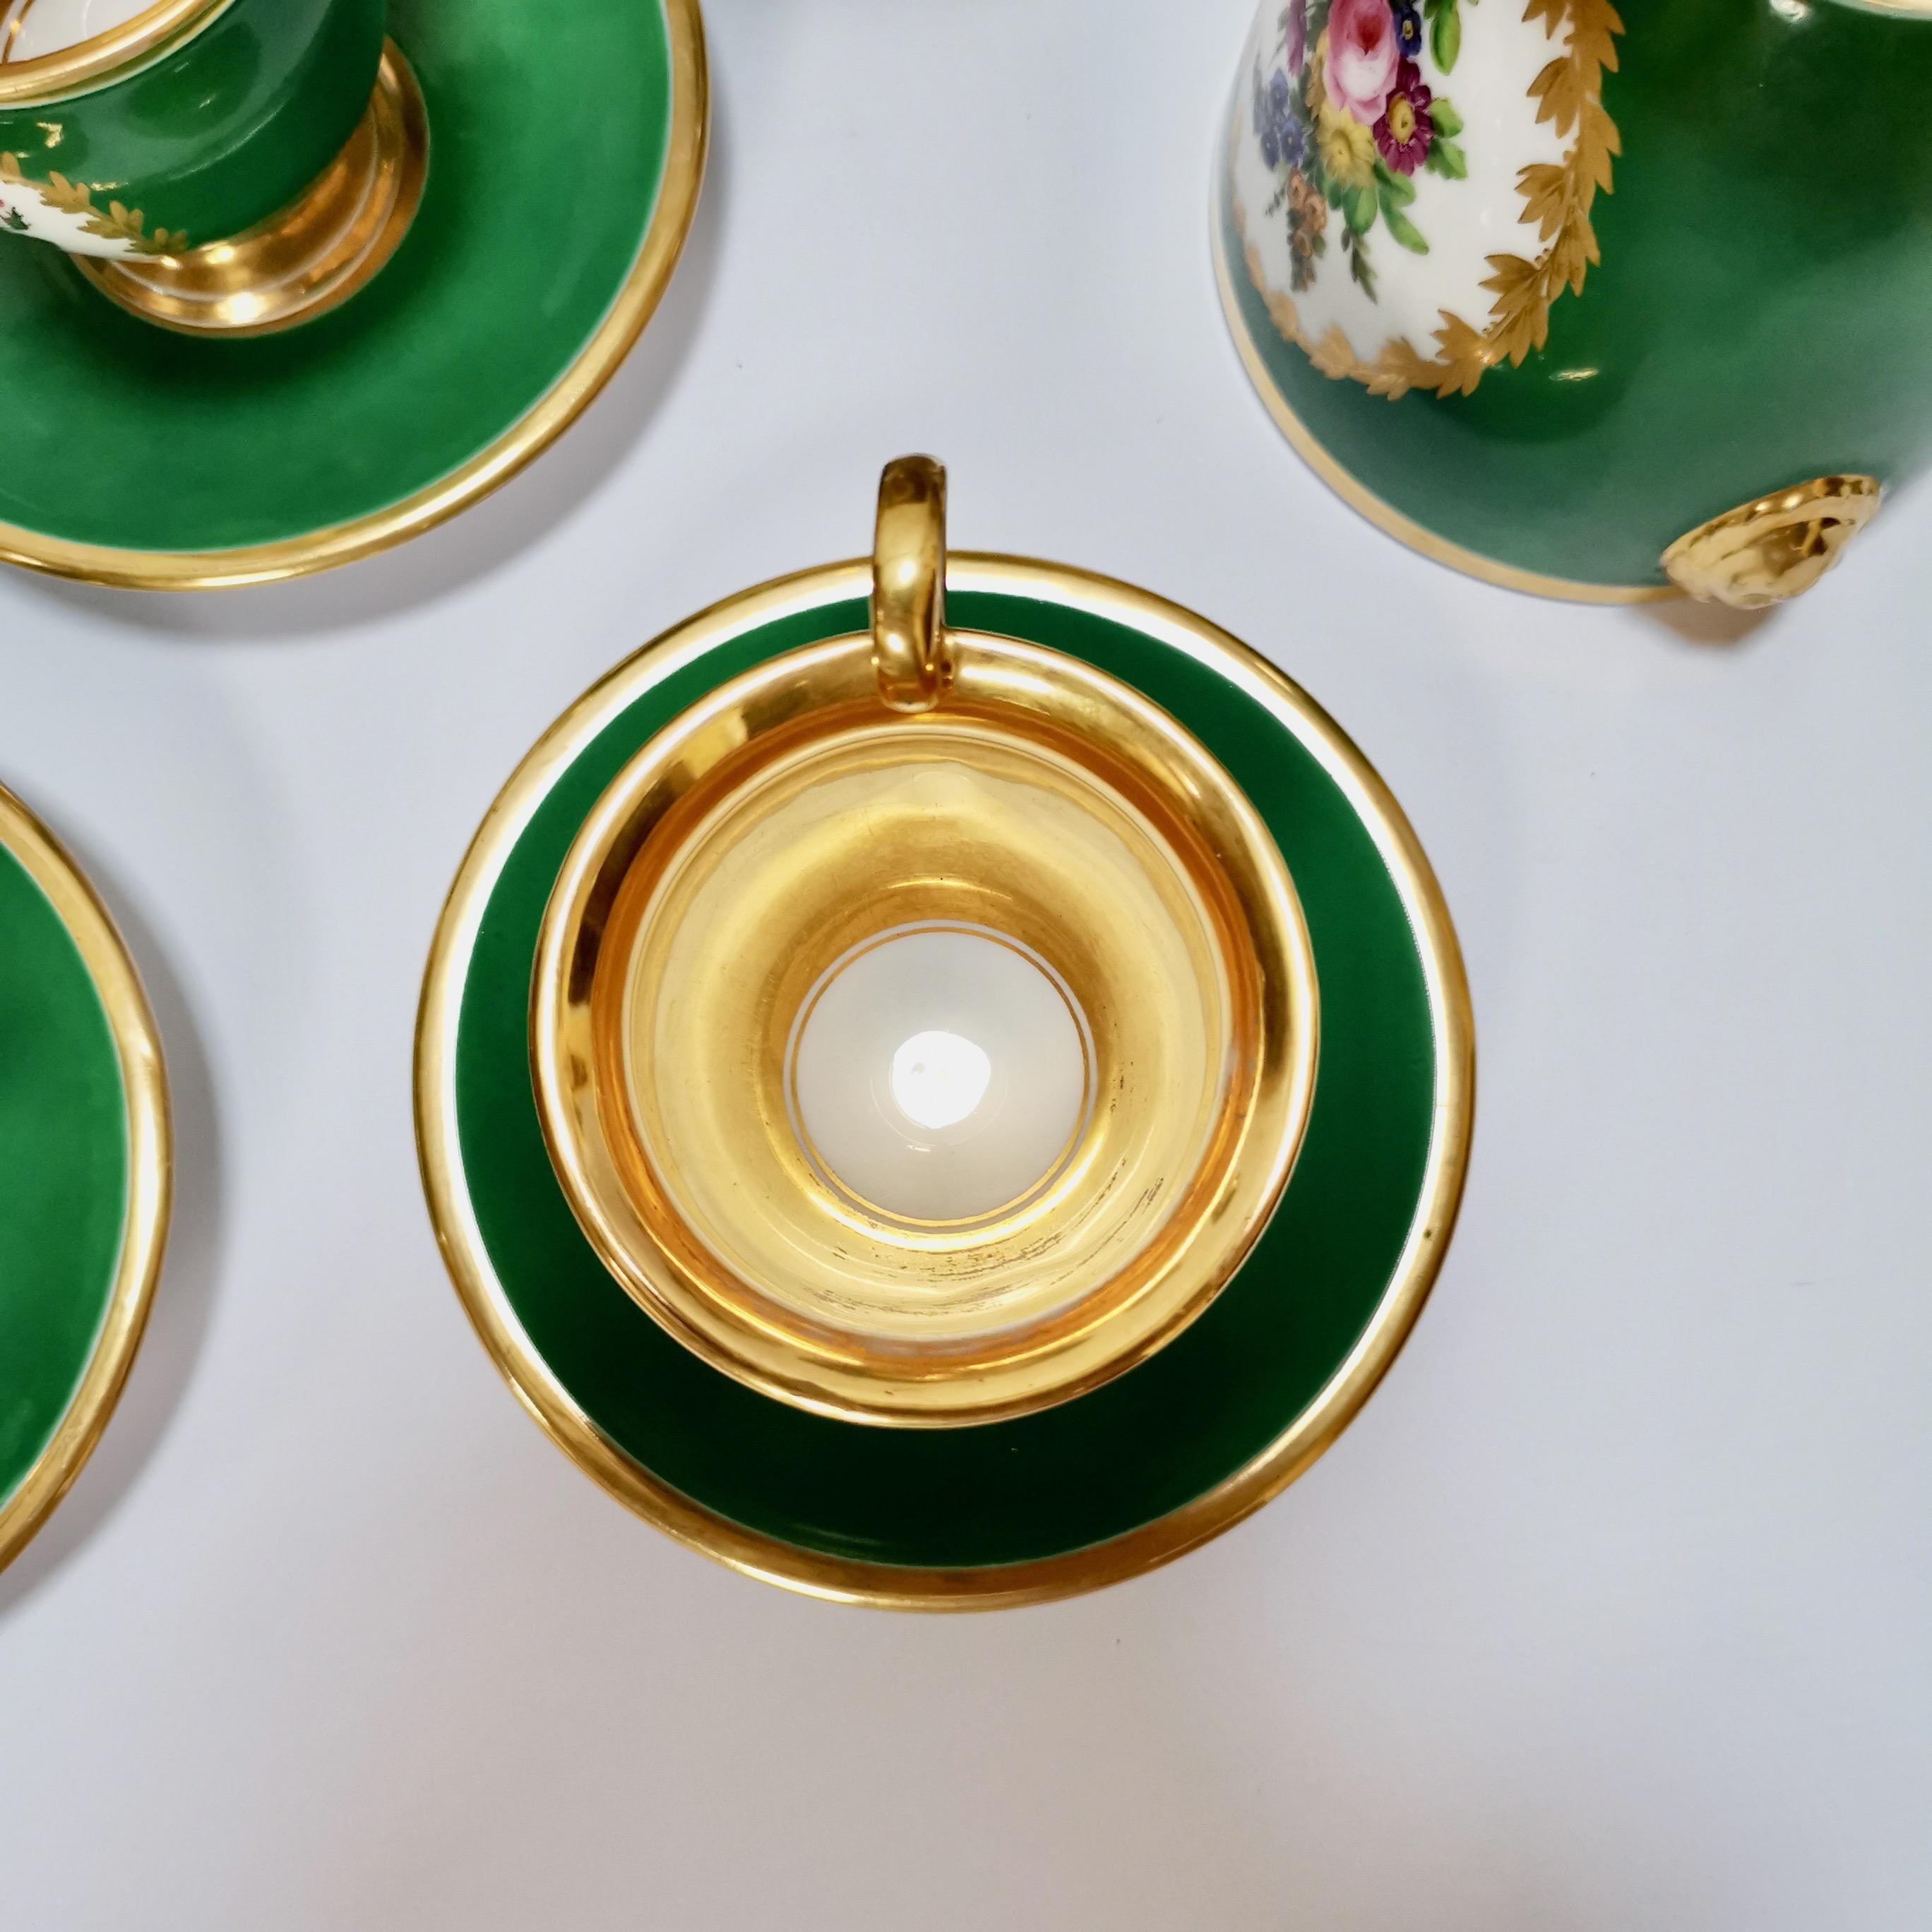 Paris Porcelain Coffee Service, Emerald Green and Floral, Empire Style ca 1820 8